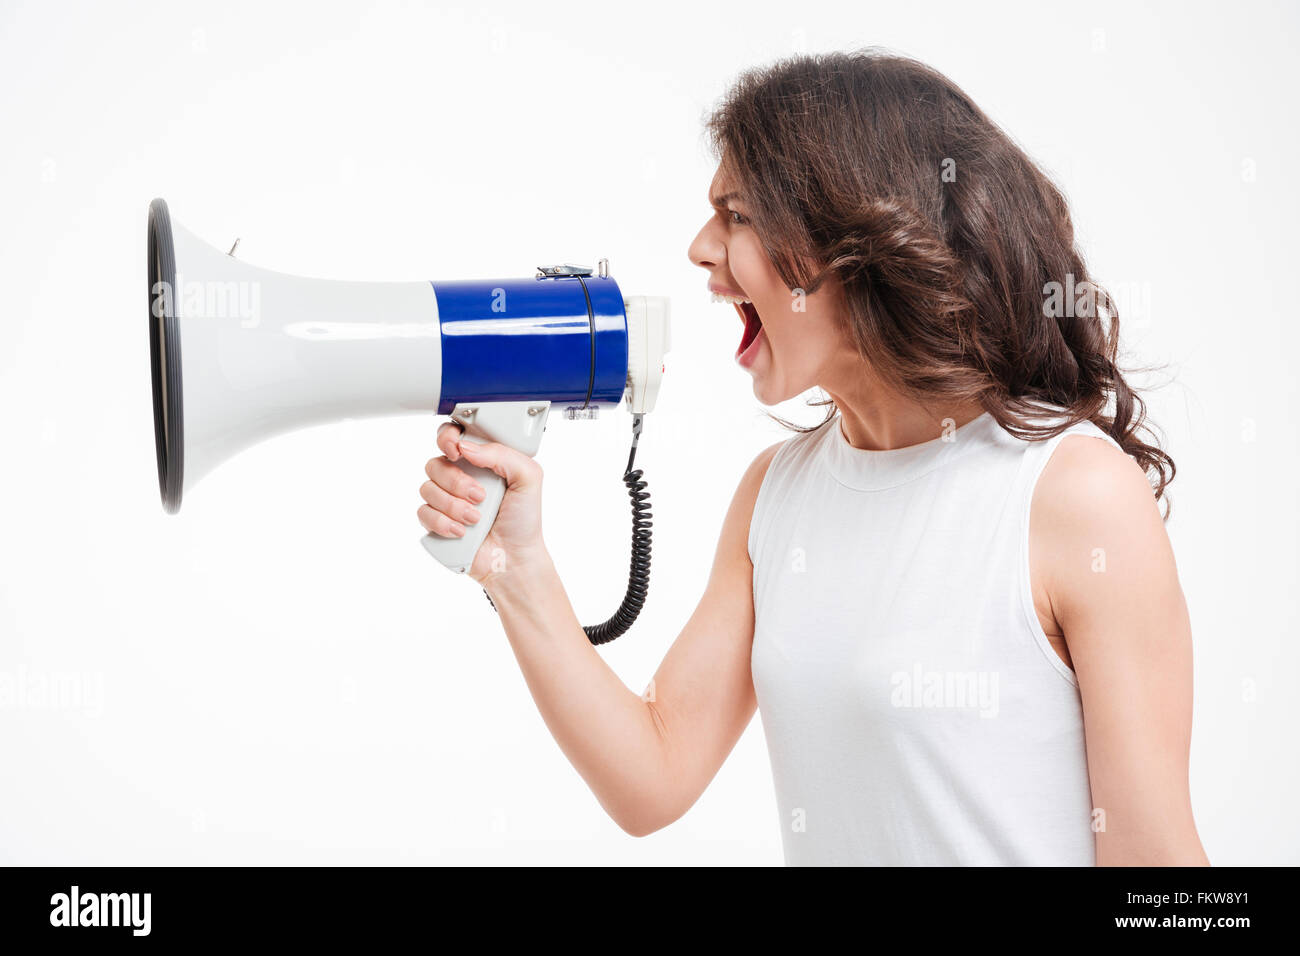 Side view portrait of a young woman screaming into megaphone isolated on a white background Stock Photo